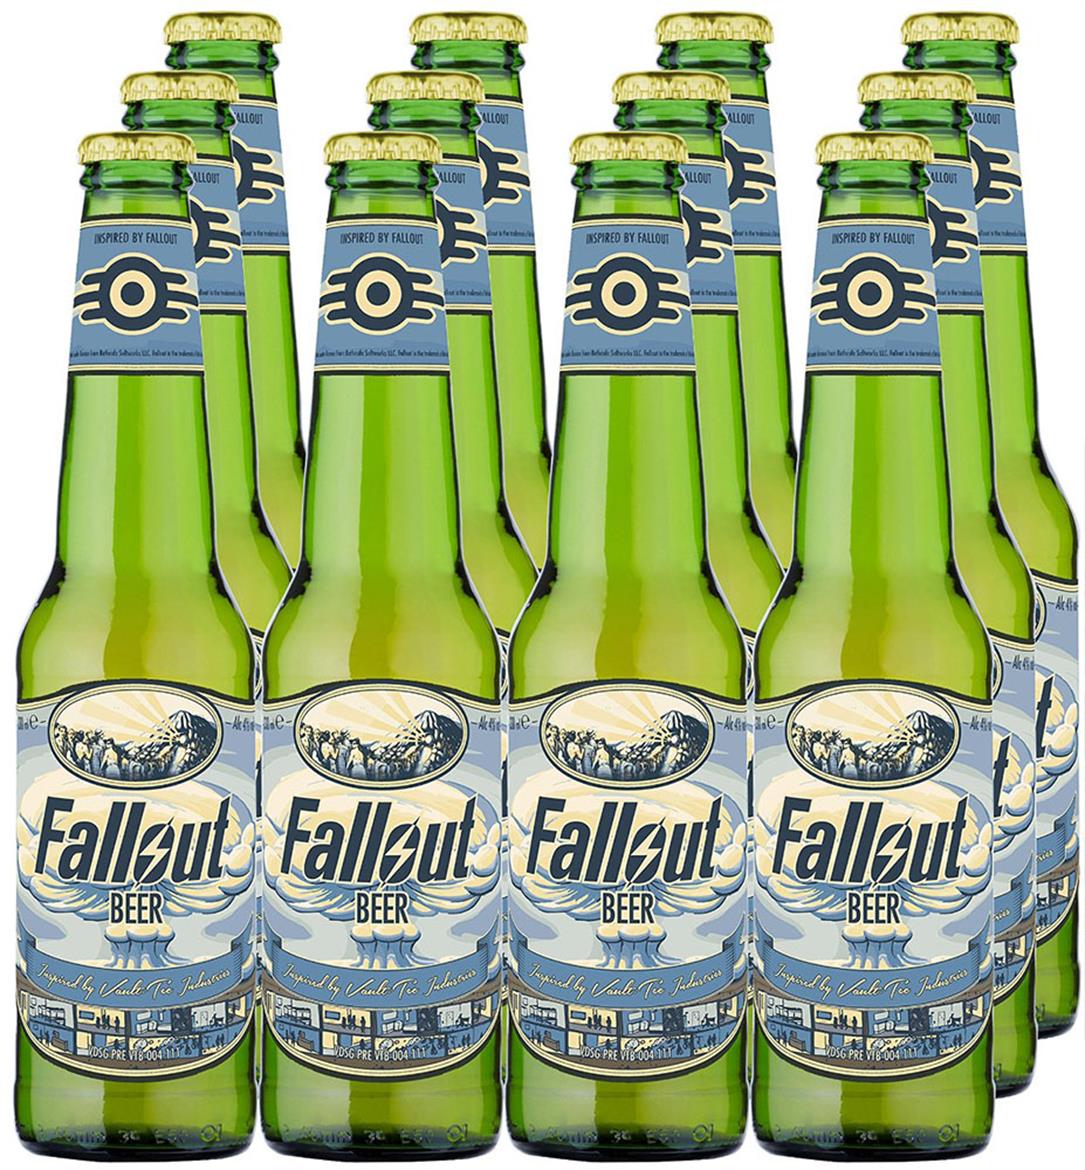 Fallout 4 Pilsner-Style Beer Is Real, And It’s Spectacular